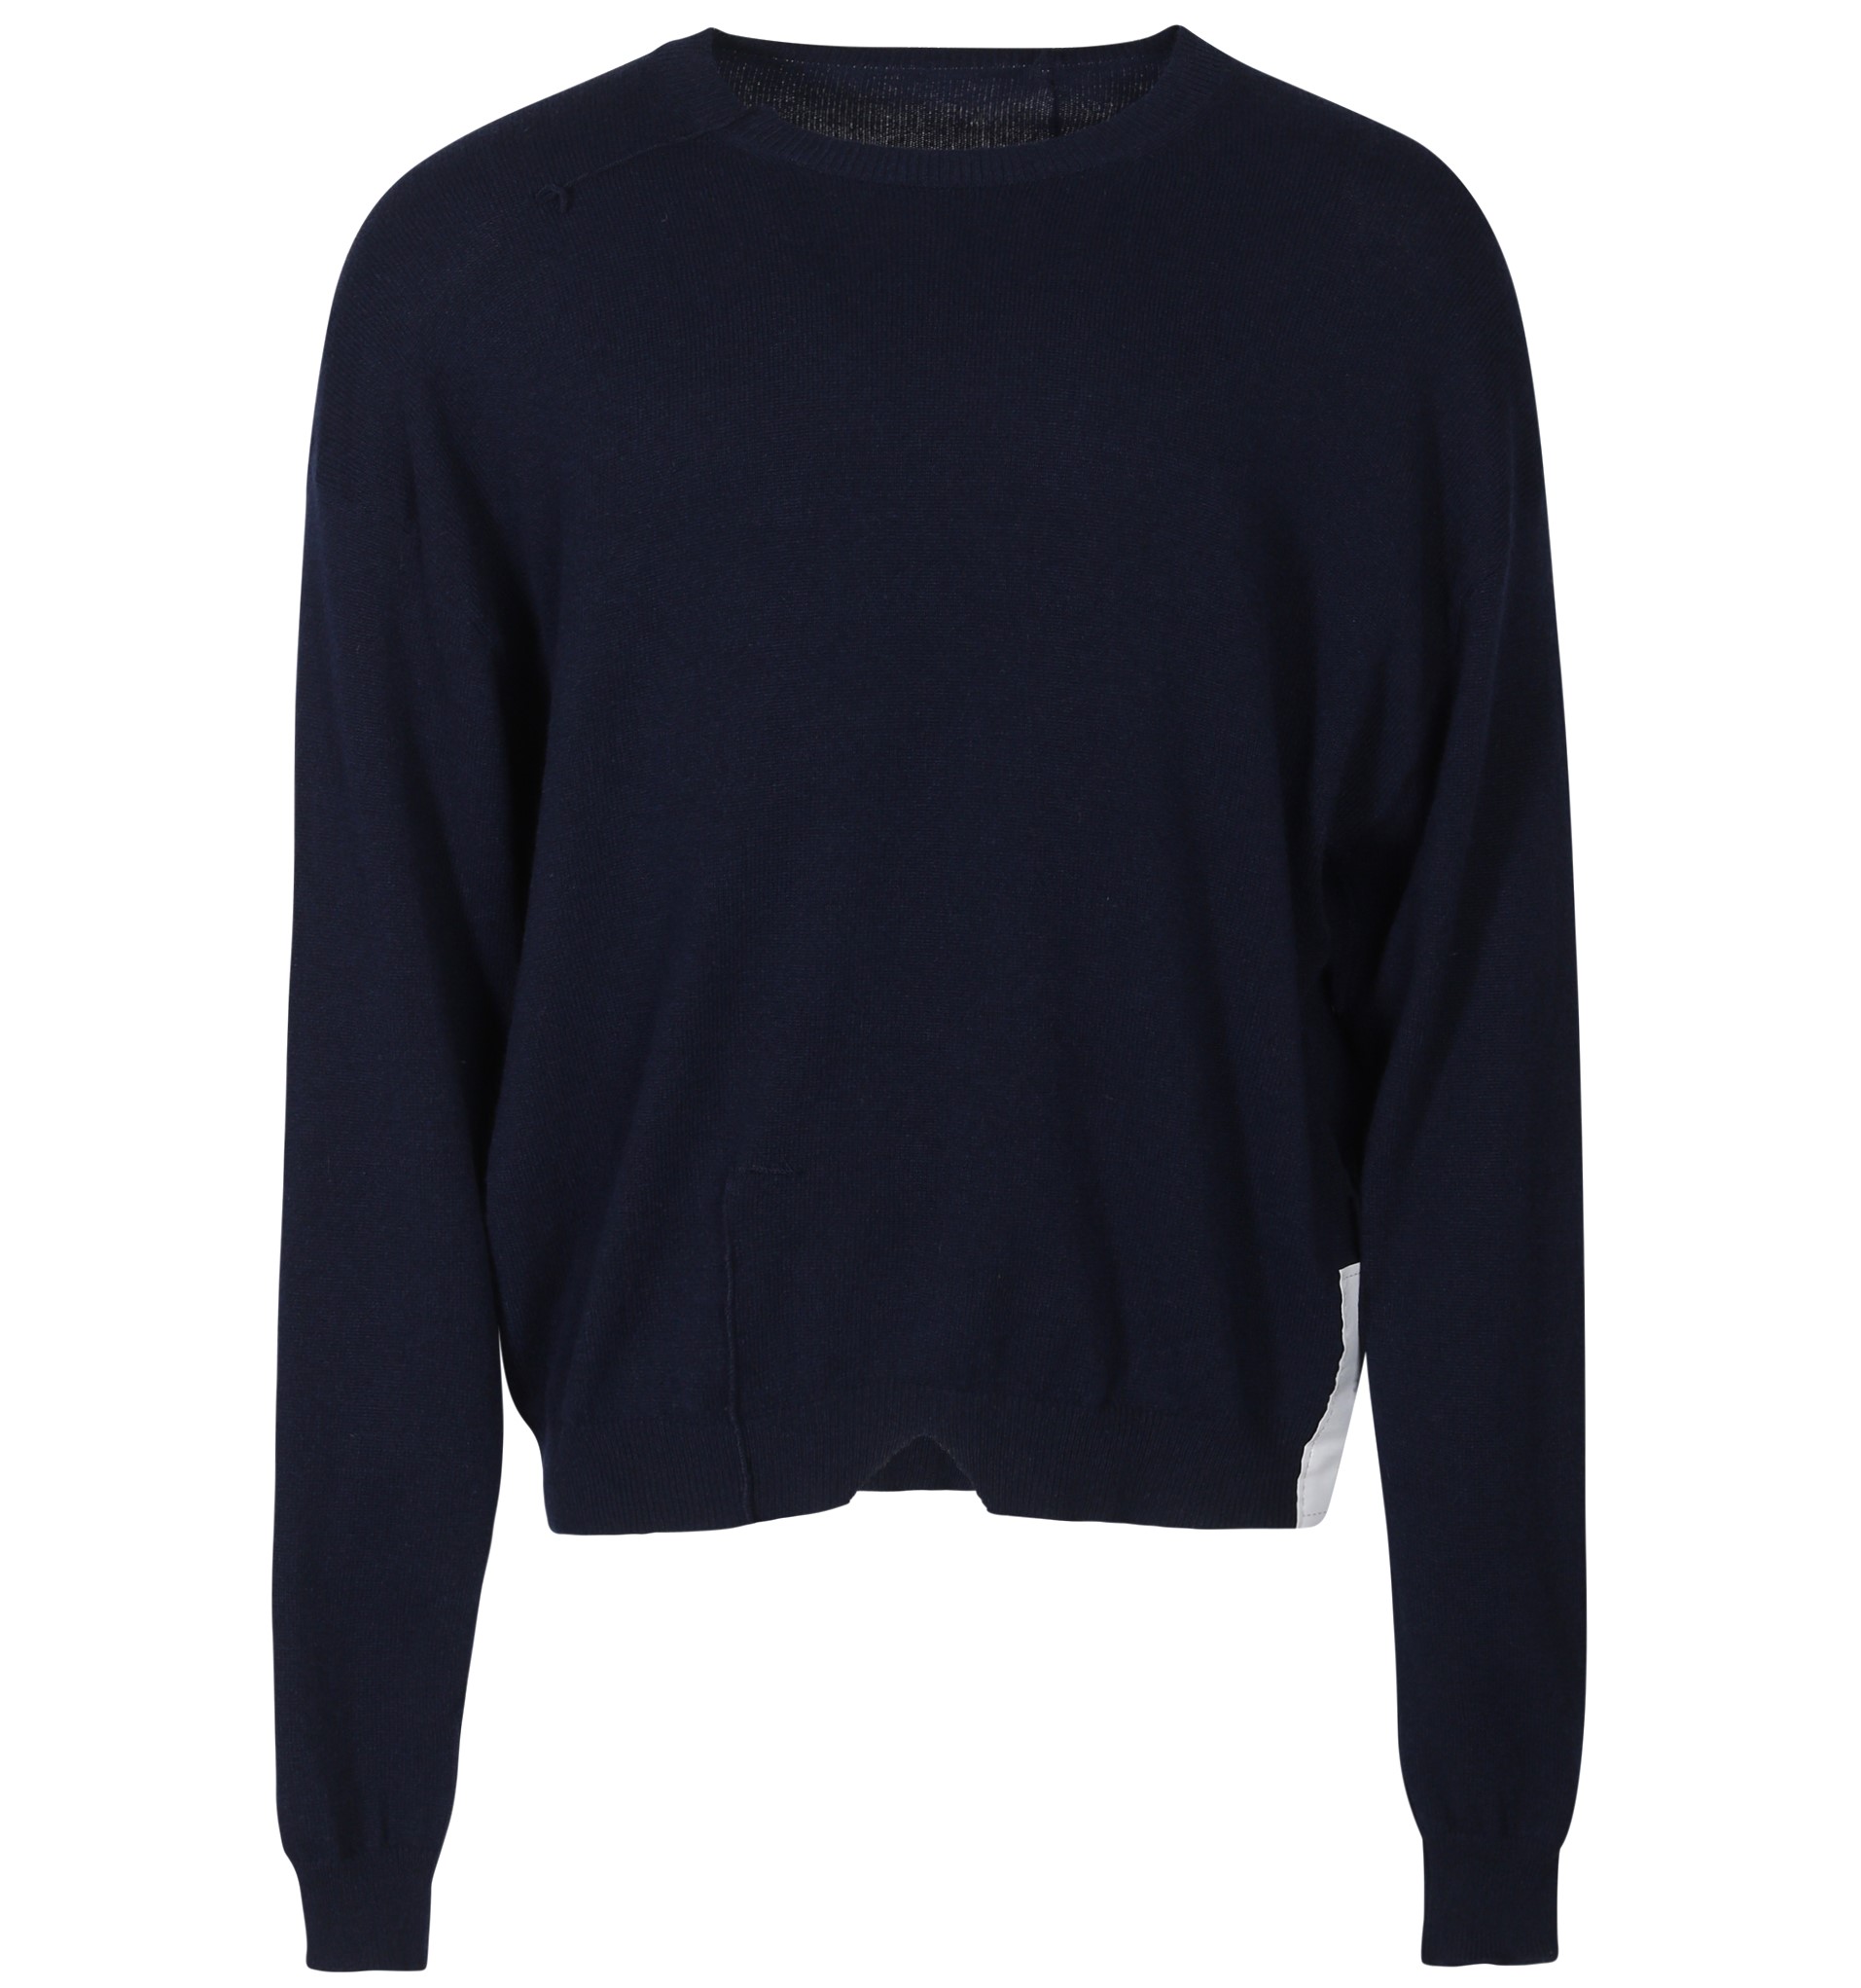 RAMAEL Infinity Cashmere Sweater in Navy L